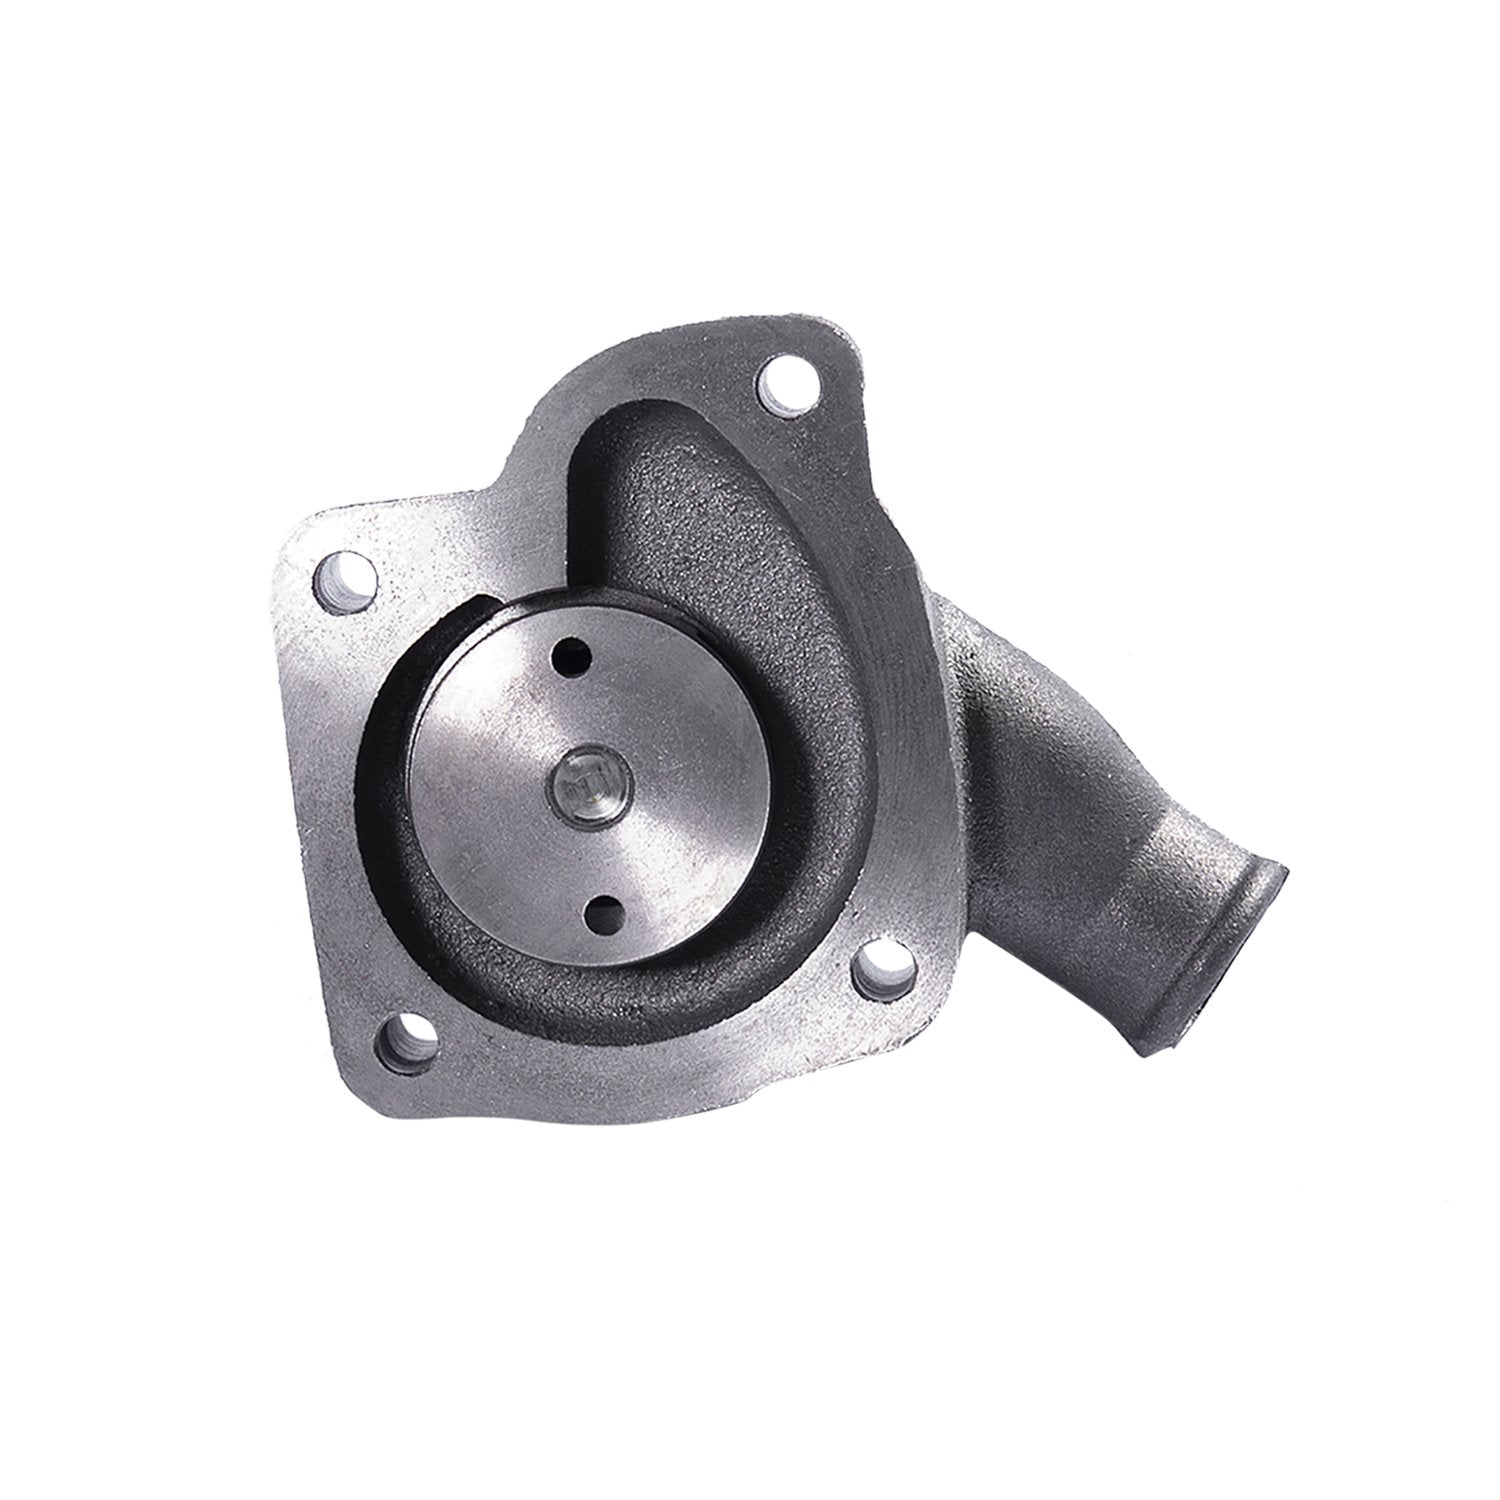 Water Pump Replacement For Holder 60010300101 11611 VD0308001